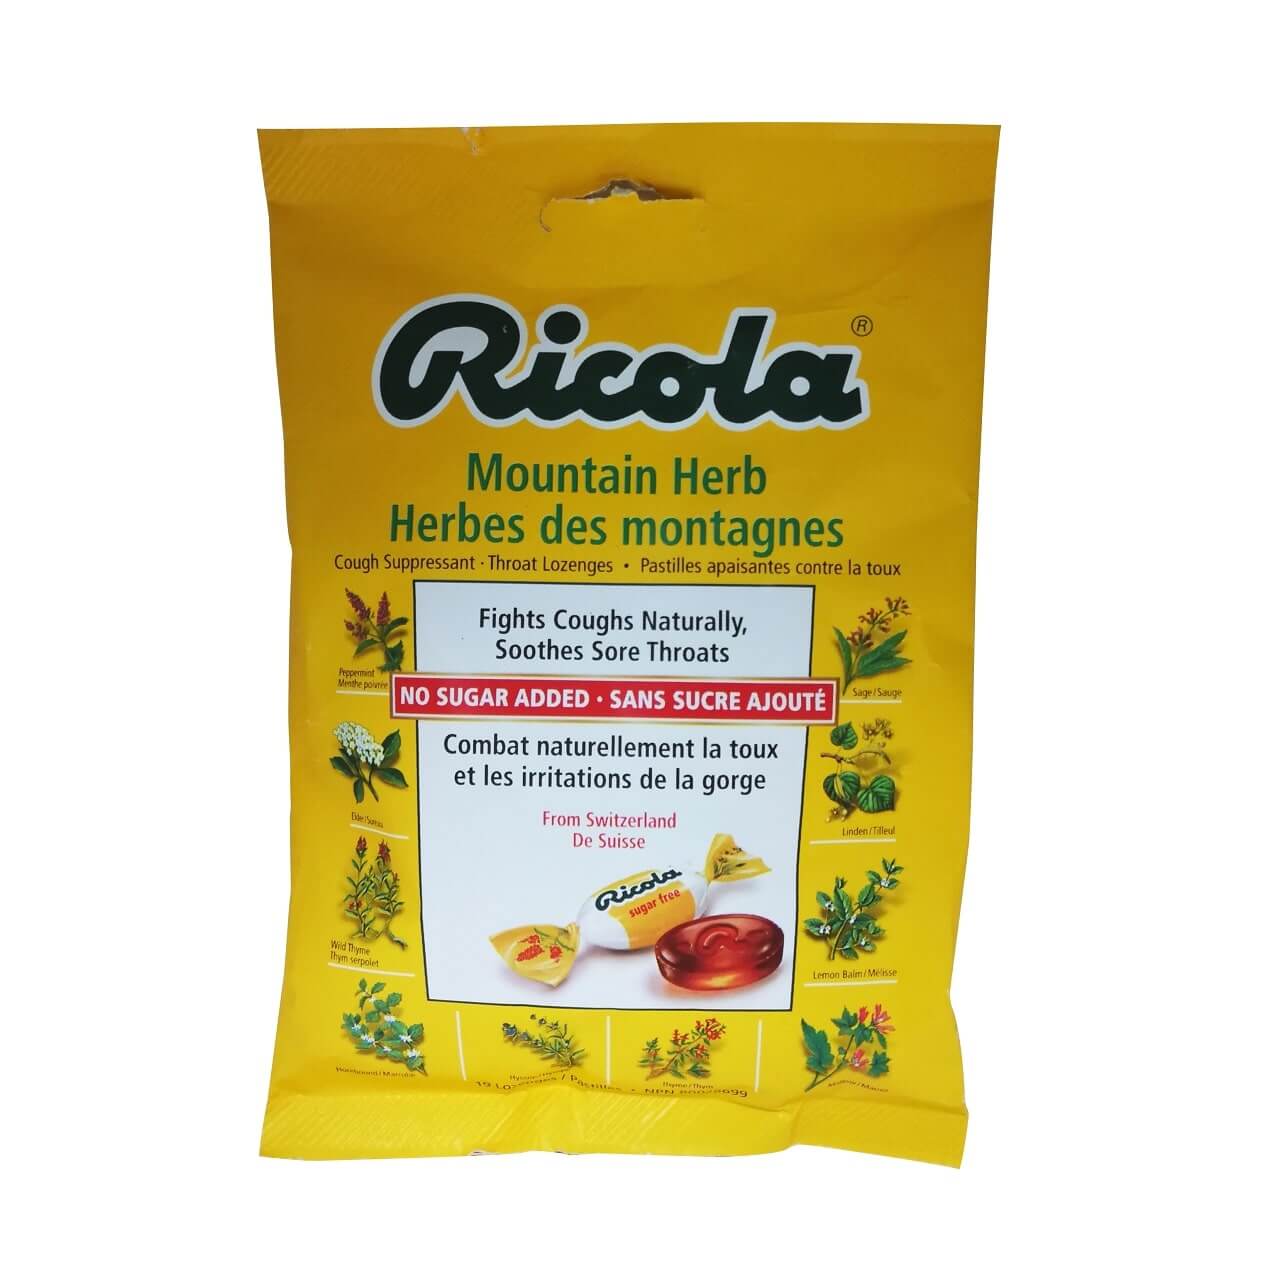 Product label for Ricola Mountain Herb (19 lozenges)